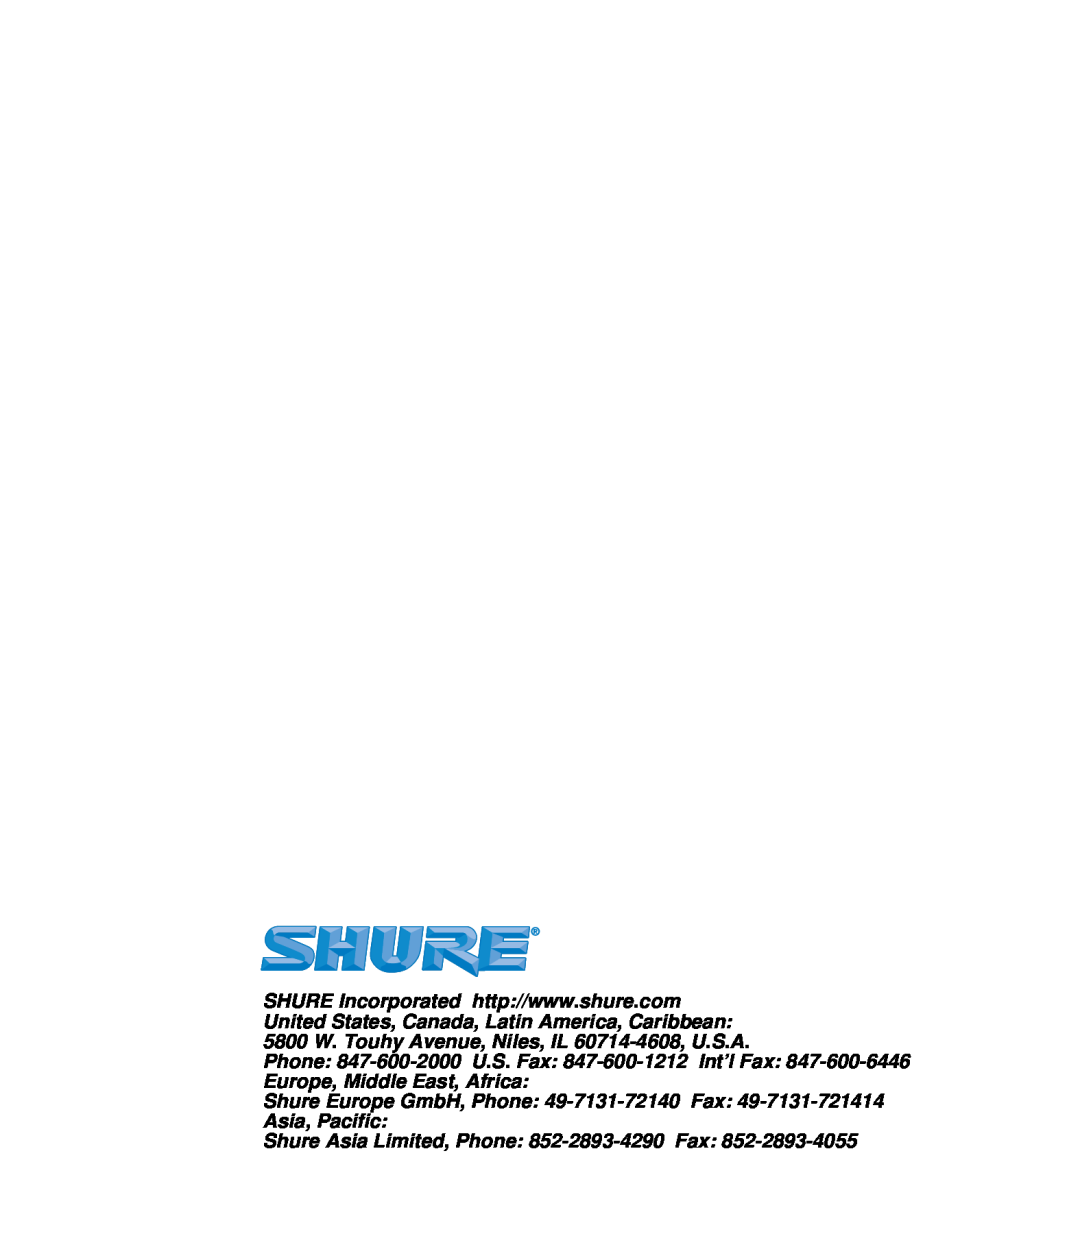 Shure WH20 manual Shure Asia Limited, Phone 852-2893-4290 Fax 